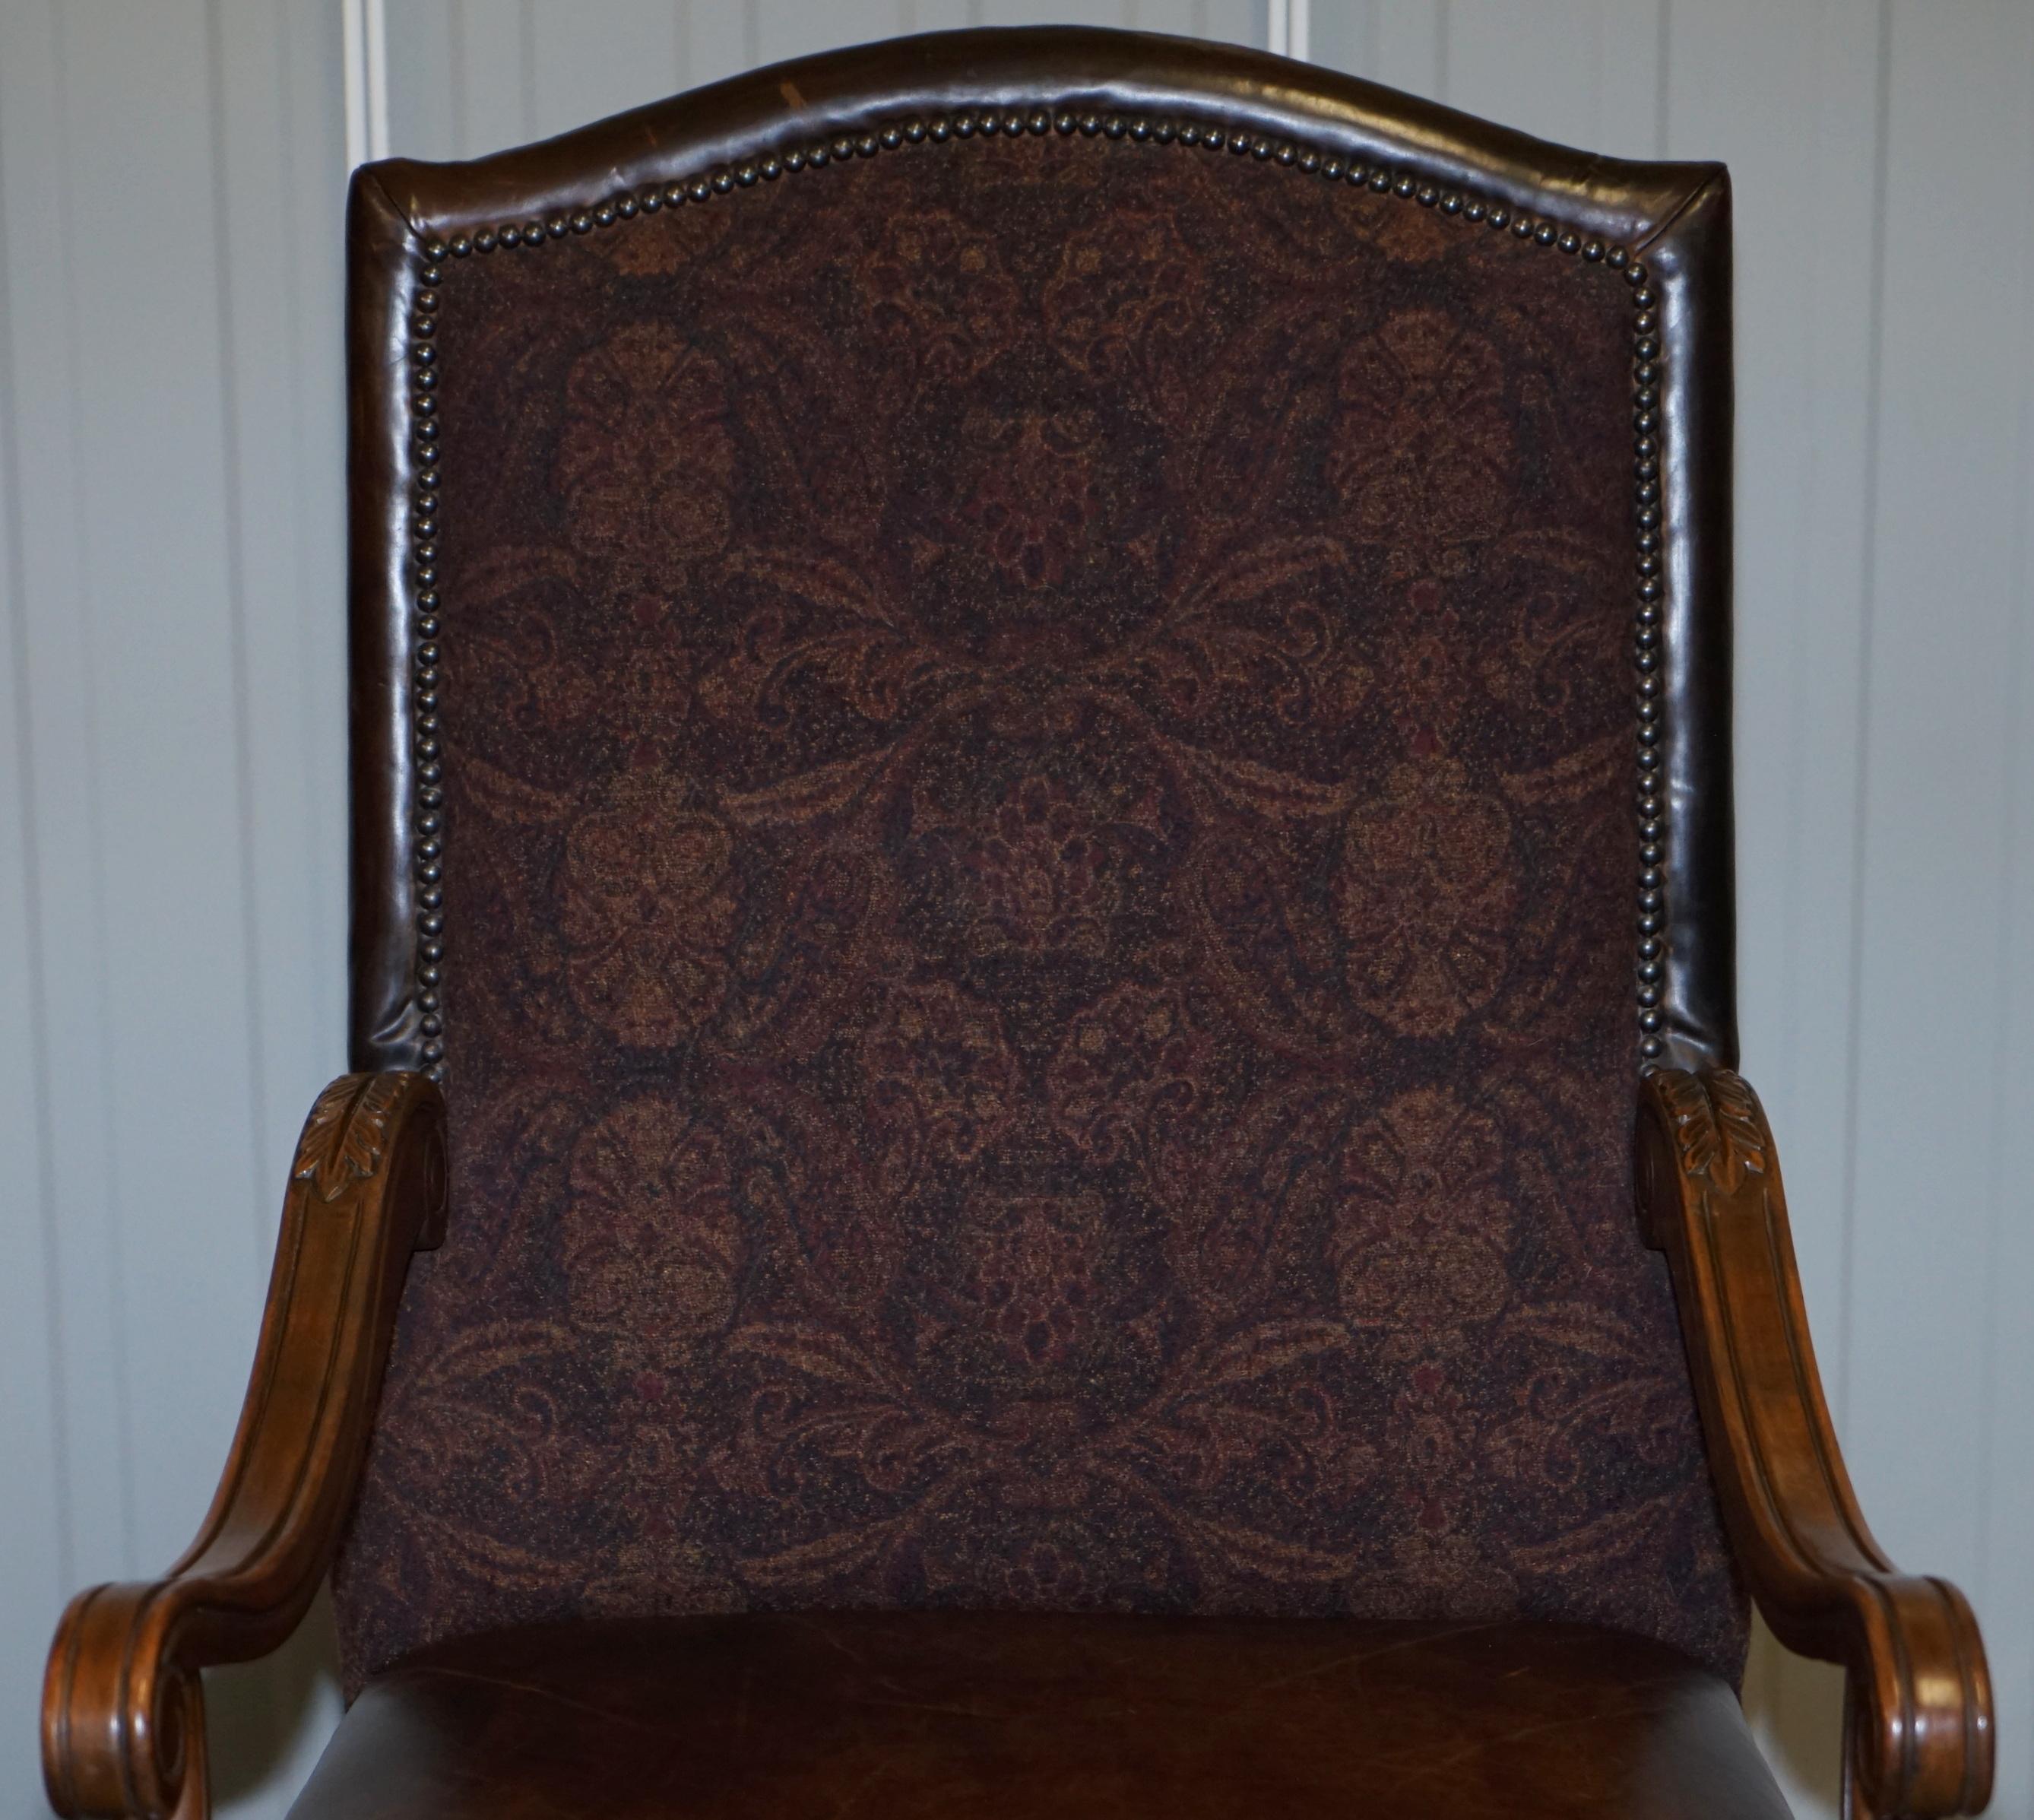 English Pair of Ralph Lauren Edmund Brown Leather & Fabric Upholstered Throne Armchairs